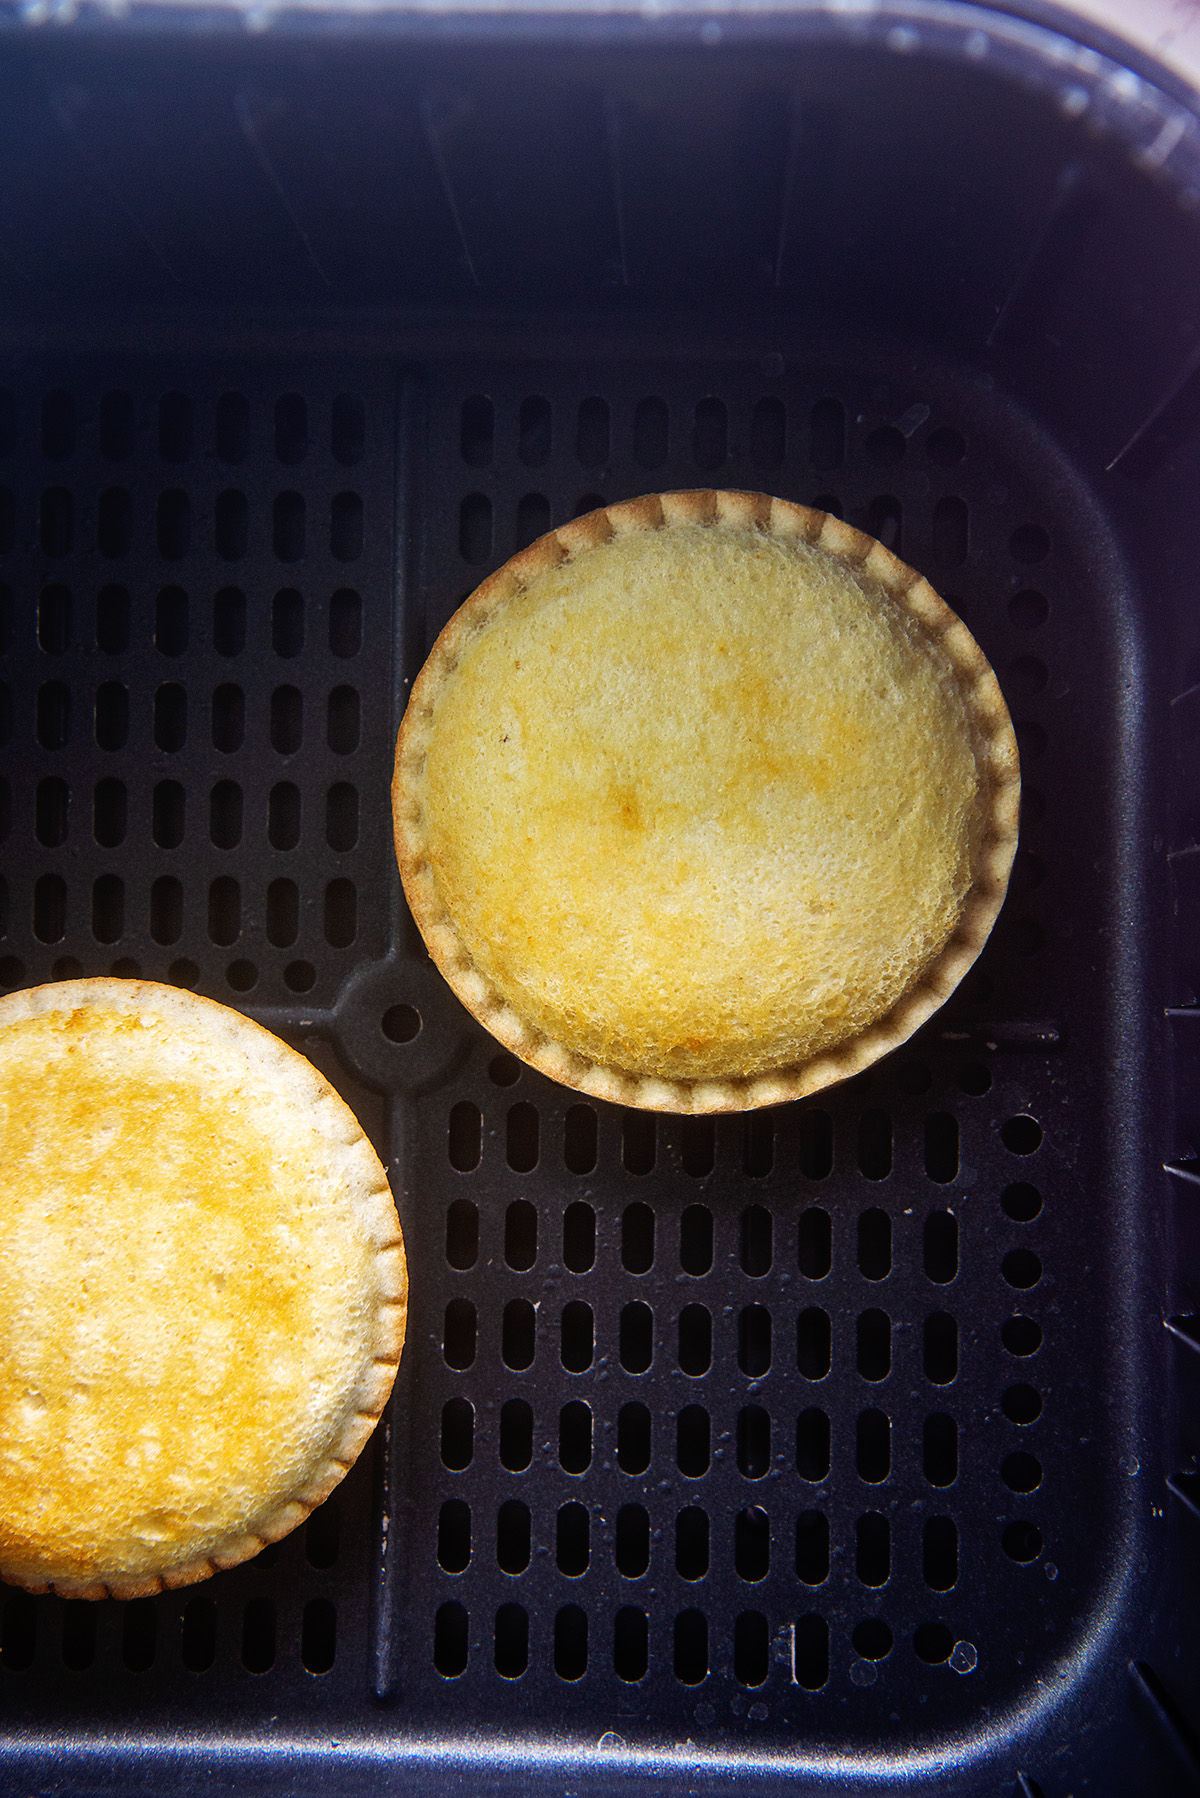 two cooked uncrustables in an air fryer basket.